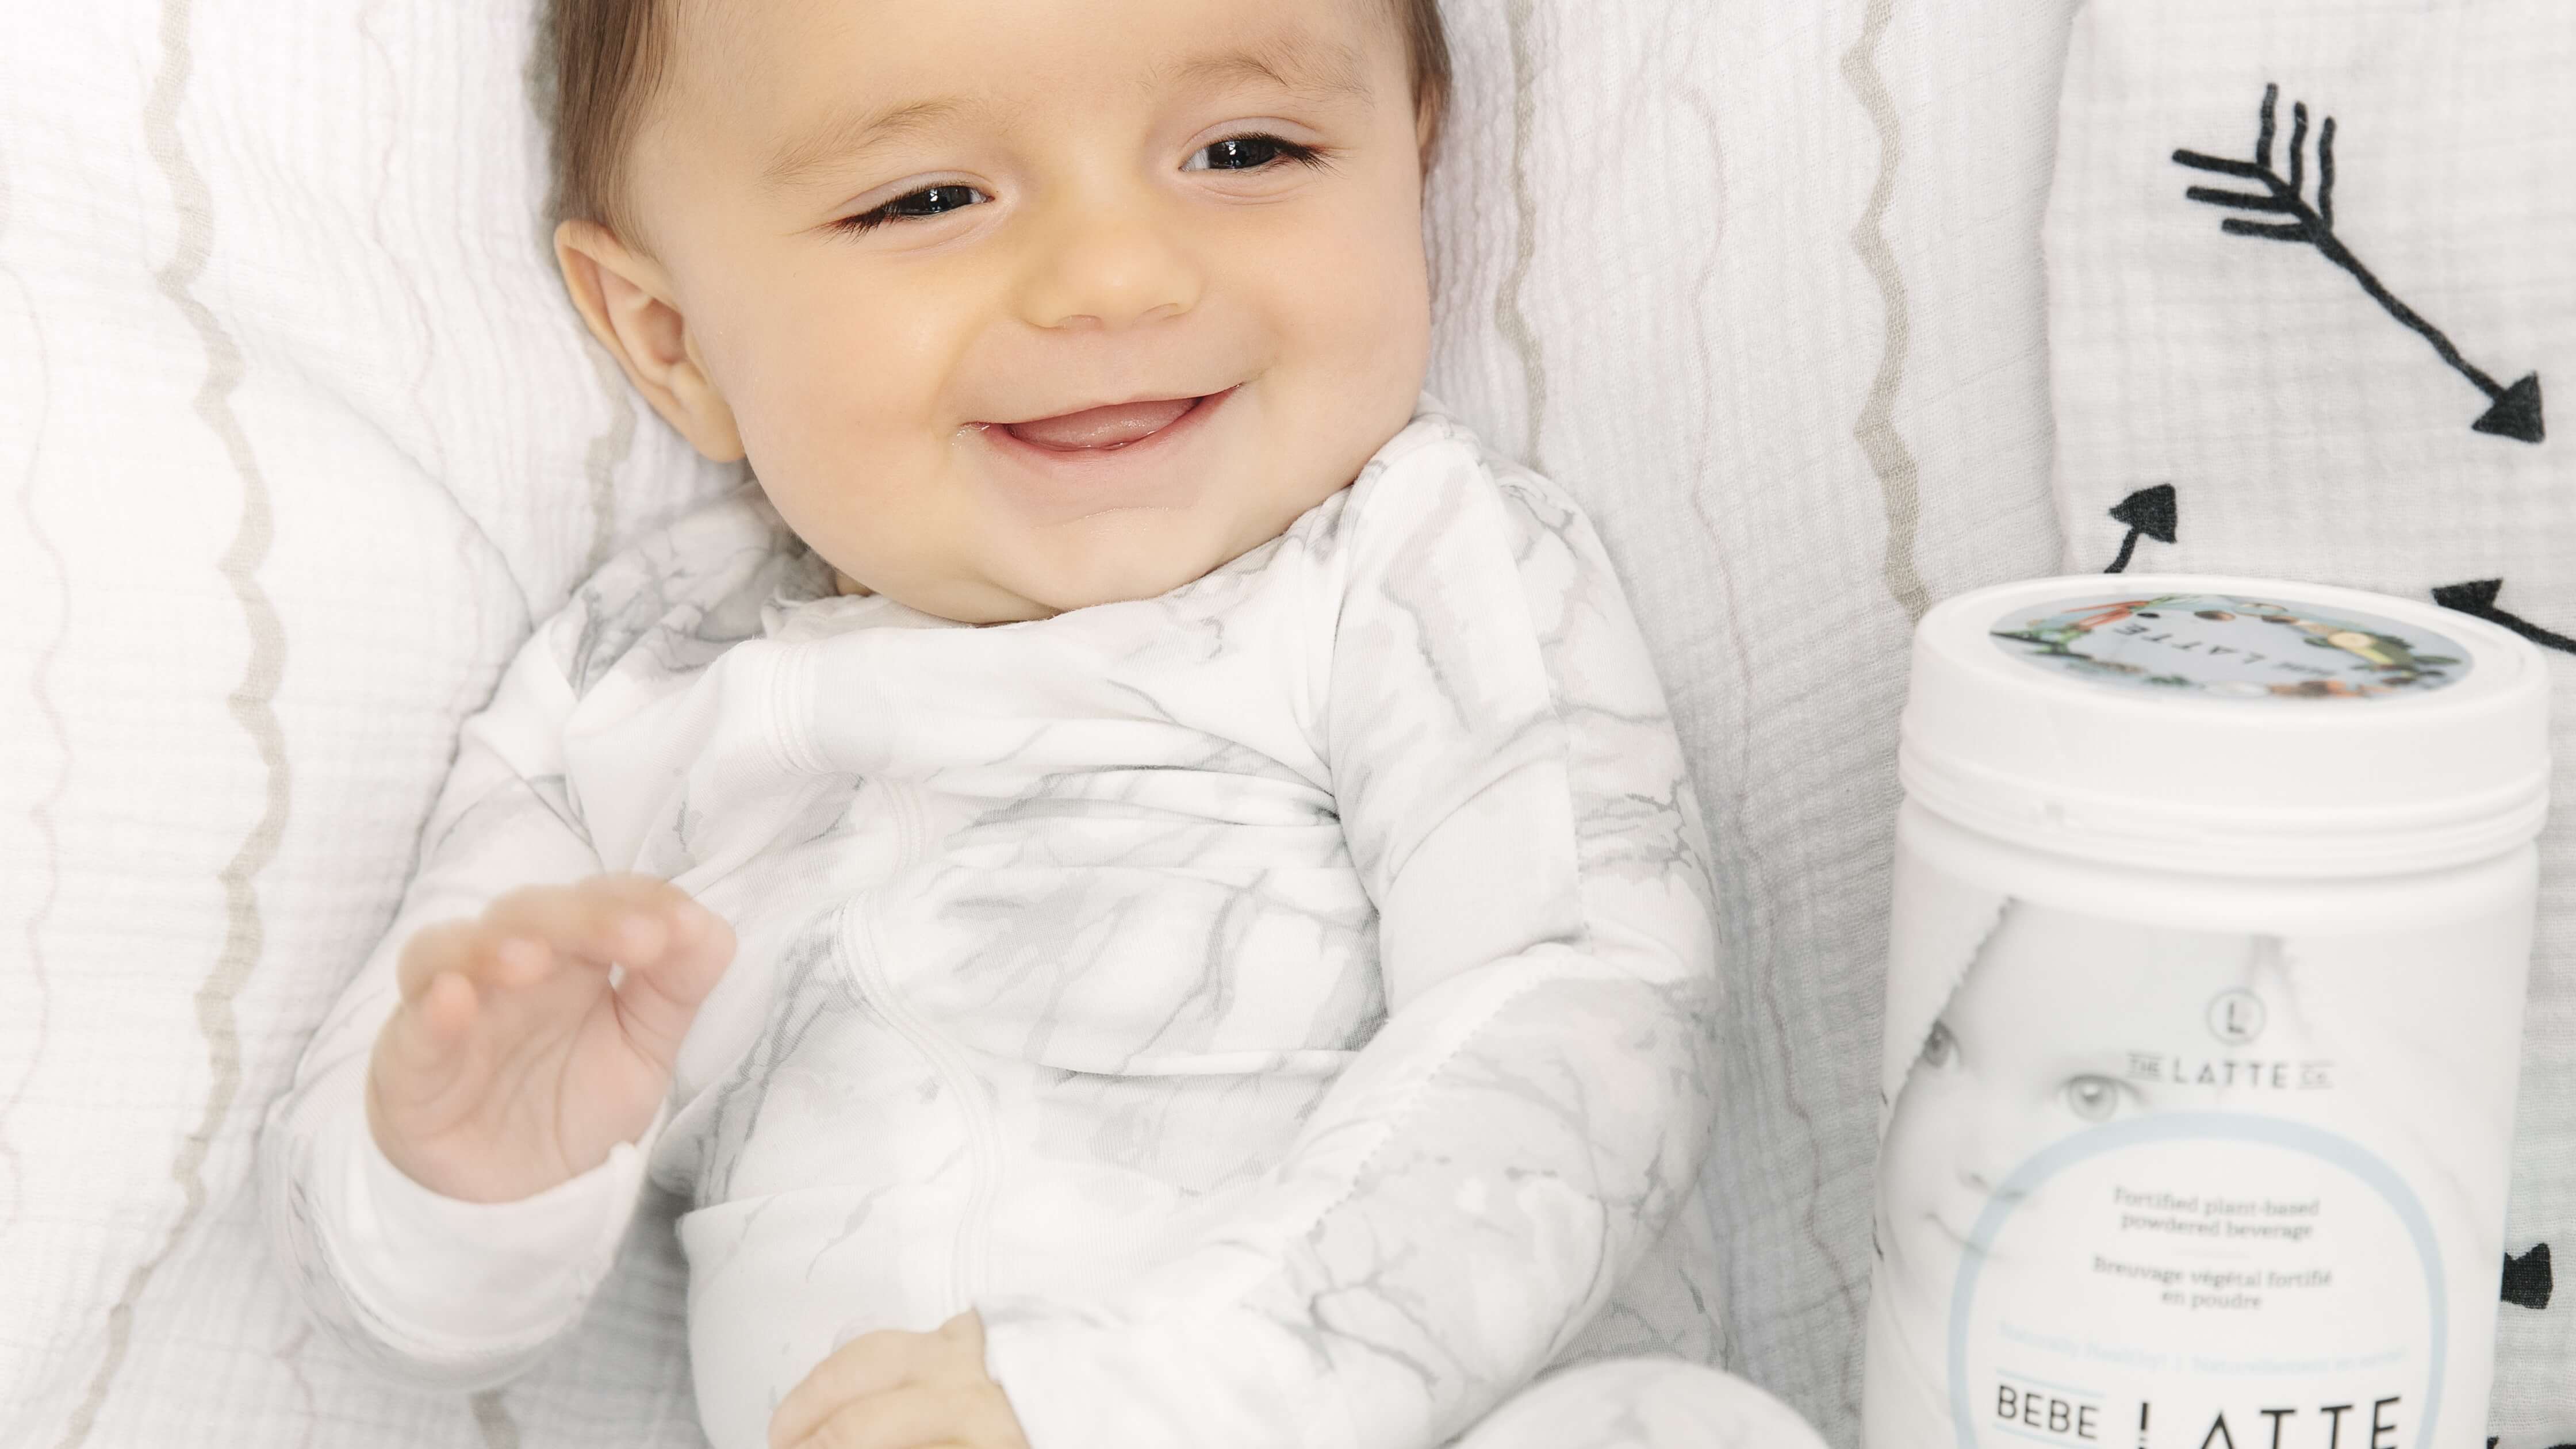 This Vegan Drink Will Give Your Baby Even More Calcium Than Dairy